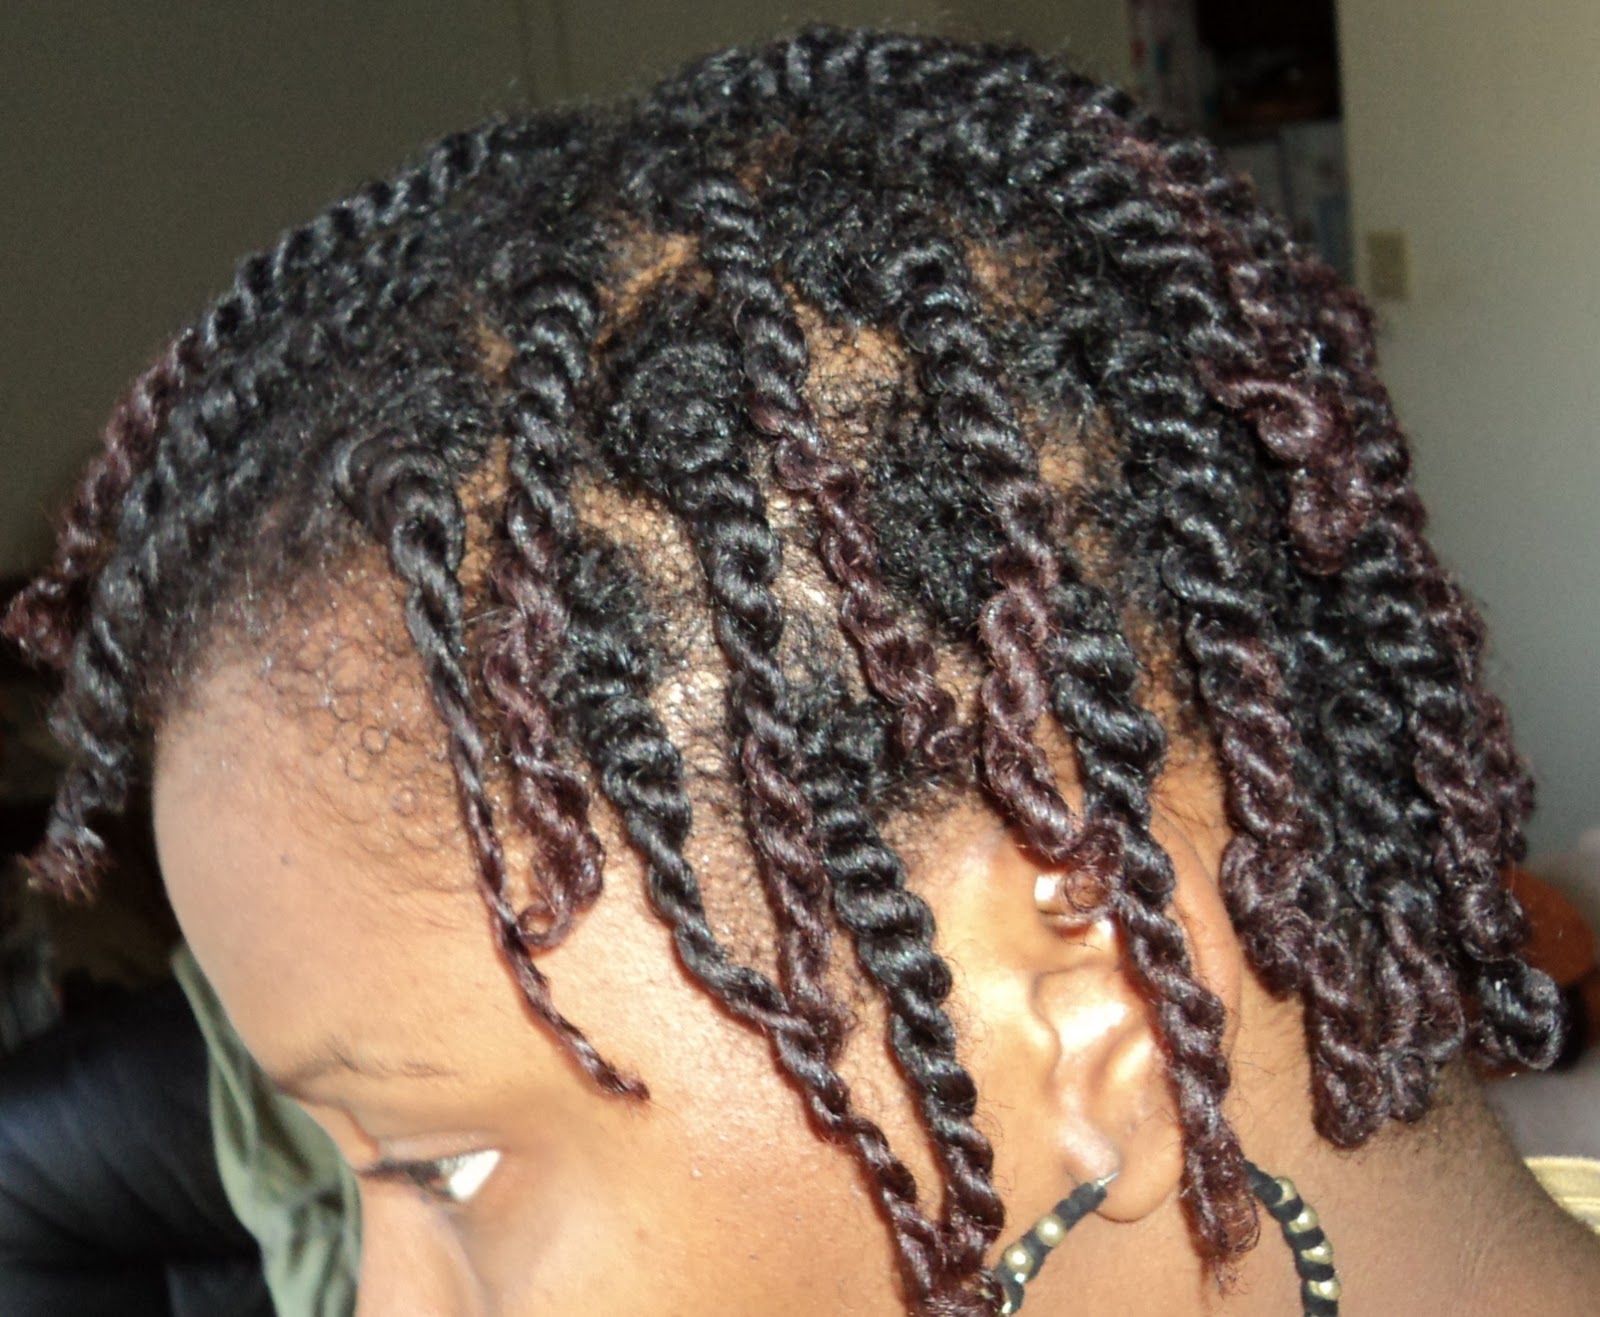 hair challenges: protective styling on fine, thin natural